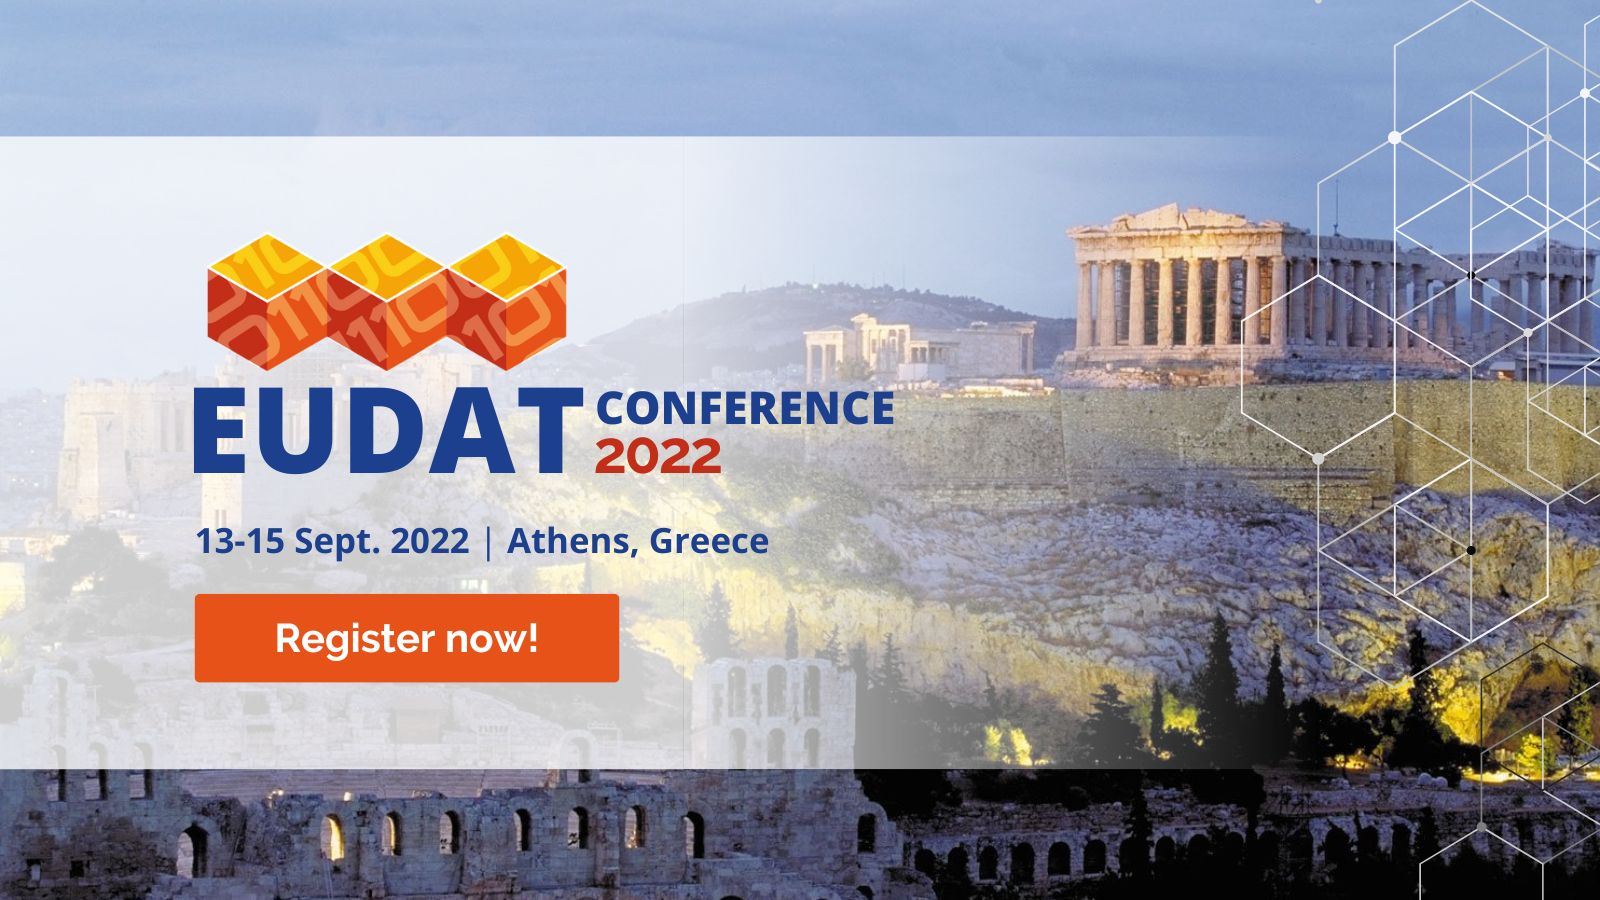 EUDAT Conference 2022